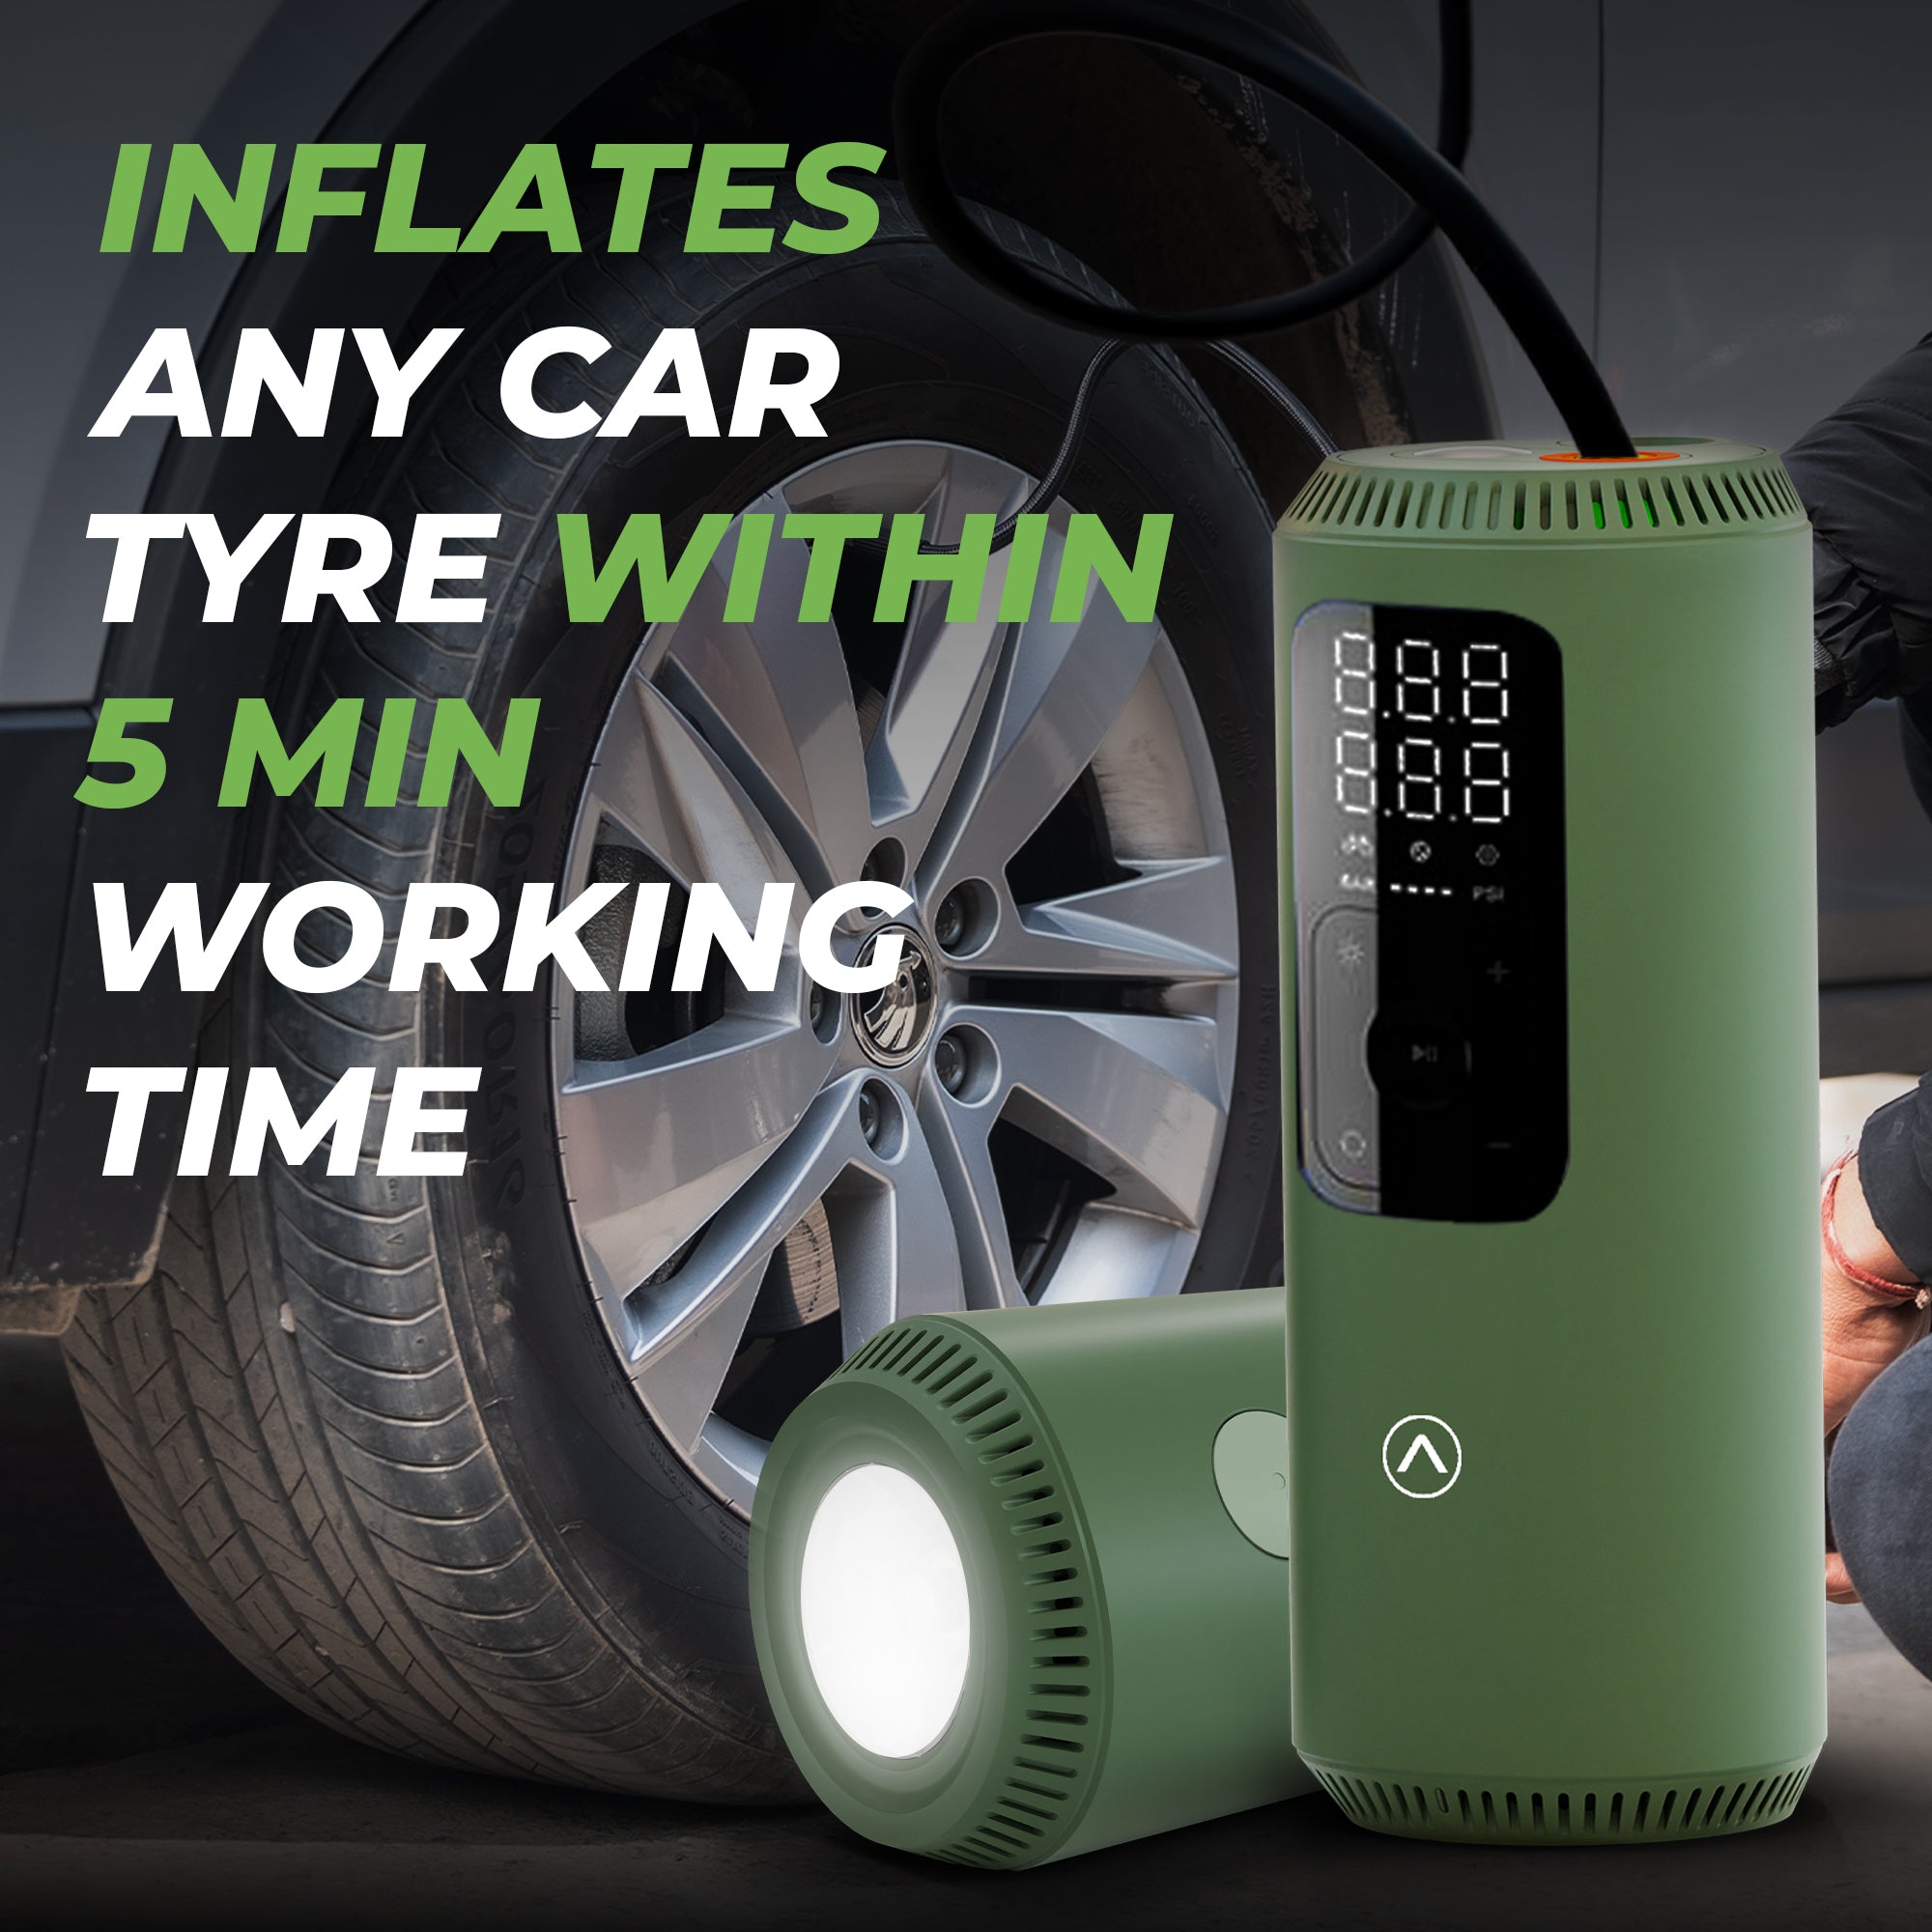 PSI 6.4 Portable & Cordless Tyre Inflator 150 psi | 6400 mAh Battery | Emergency Torch